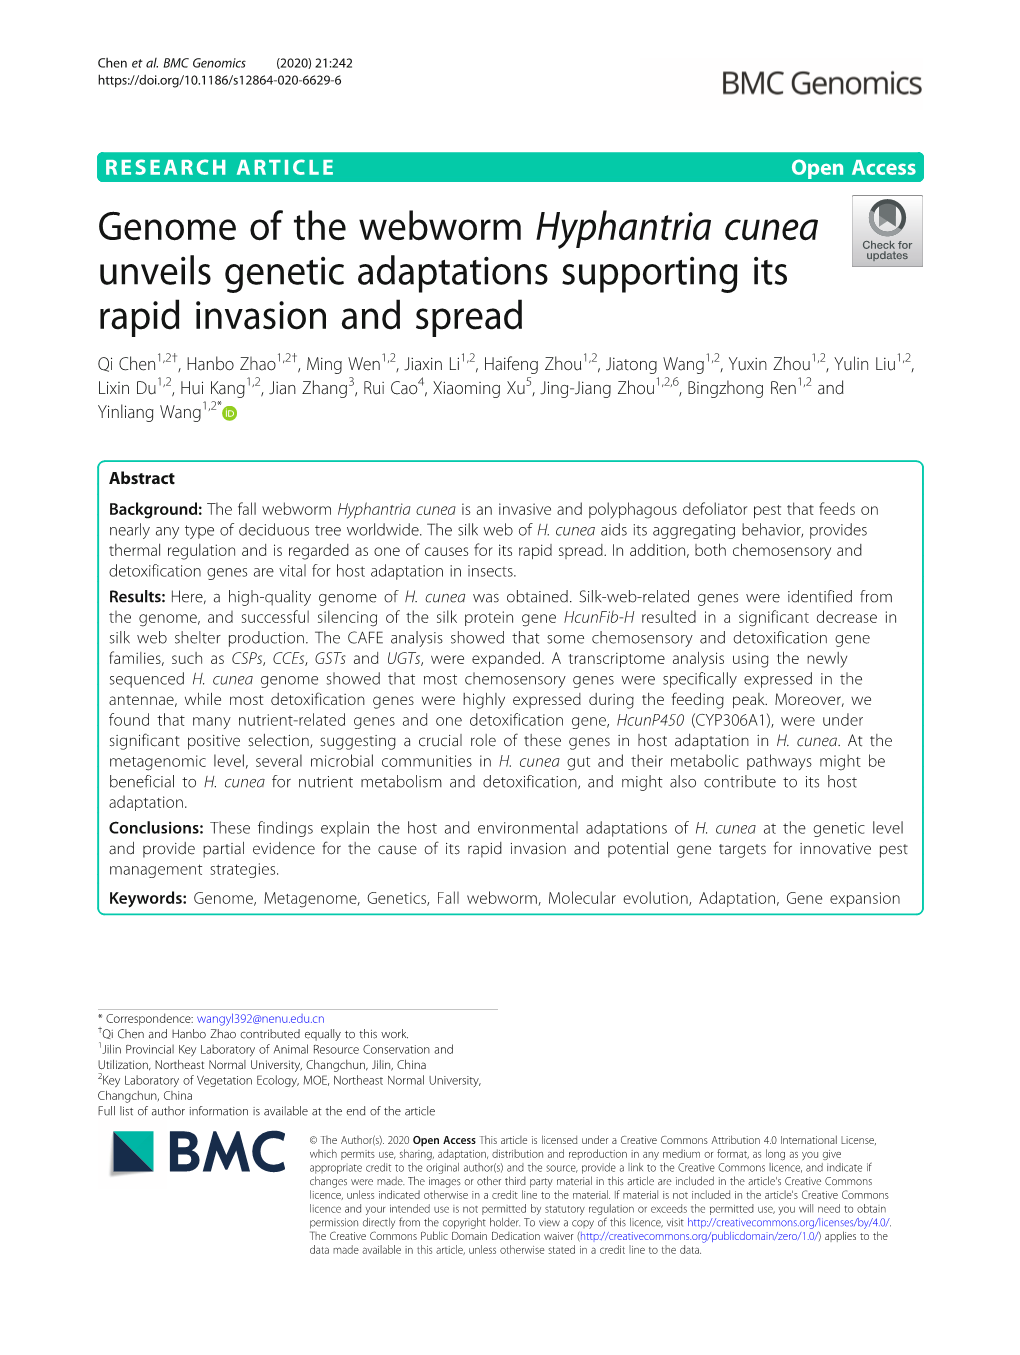 Genome of the Webworm Hyphantria Cunea Unveils Genetic Adaptations